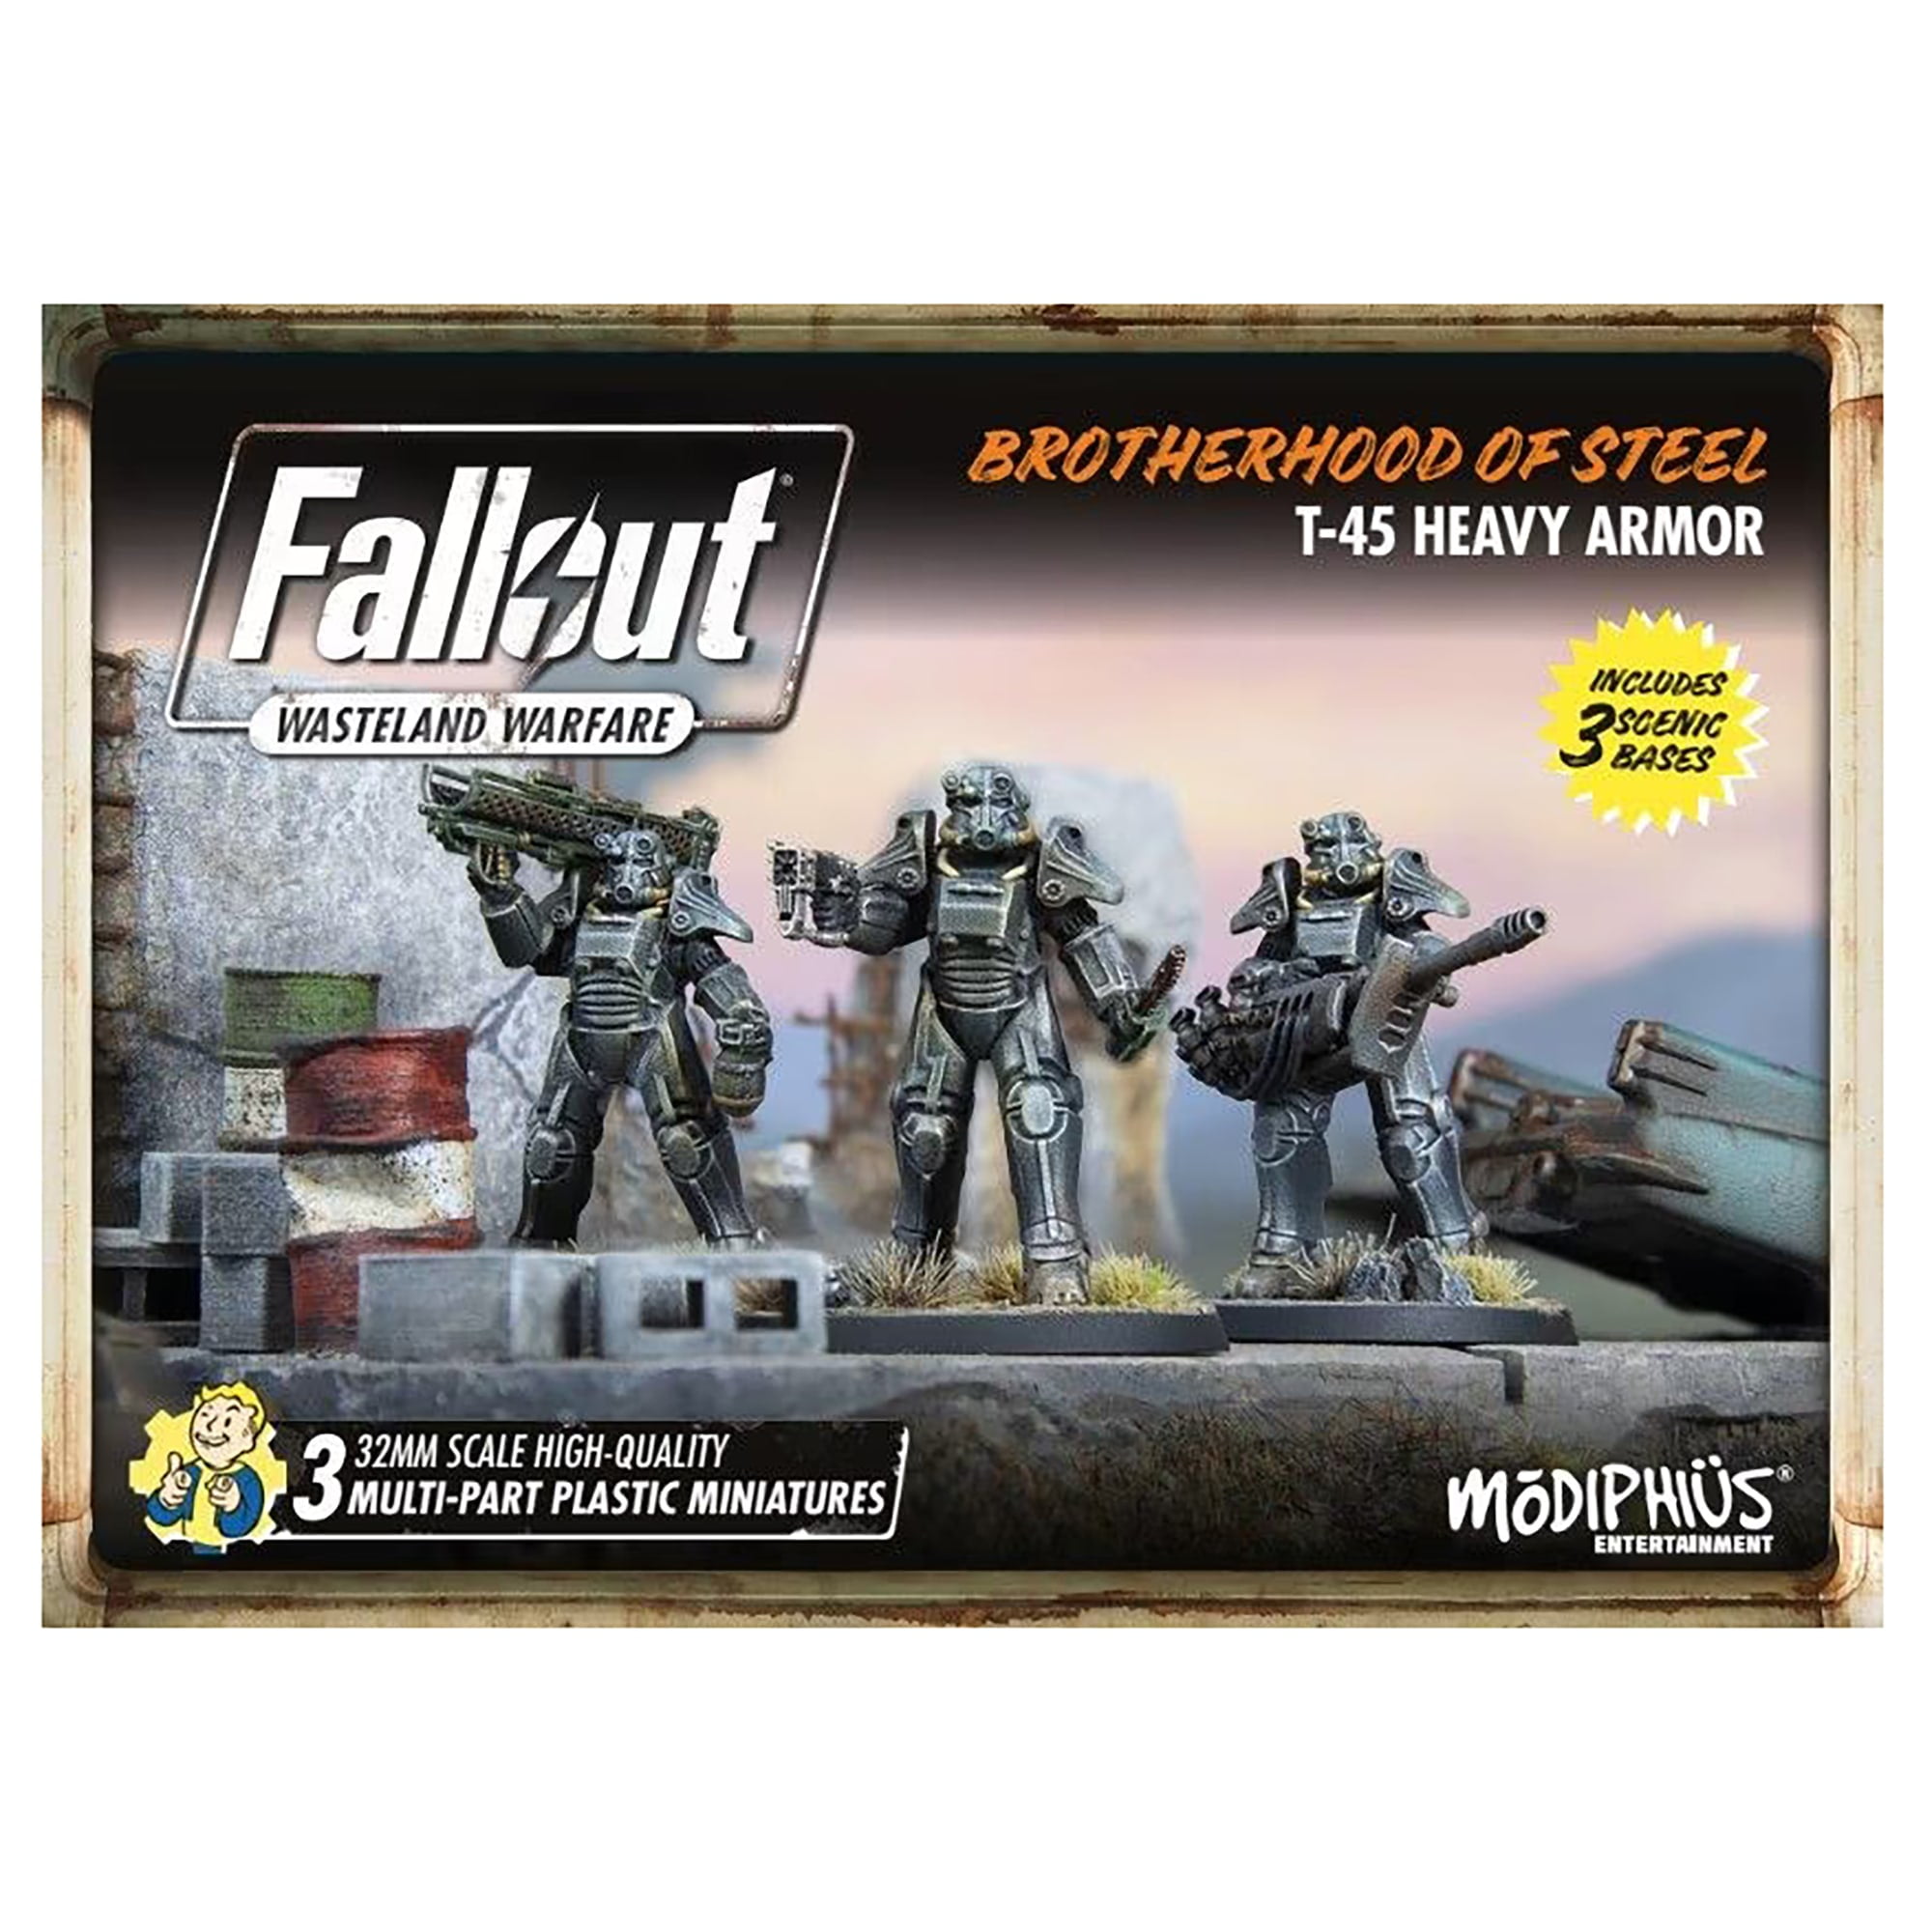 Fallout's Brotherhood of Steel Merchandise, Gift Ideas and Products